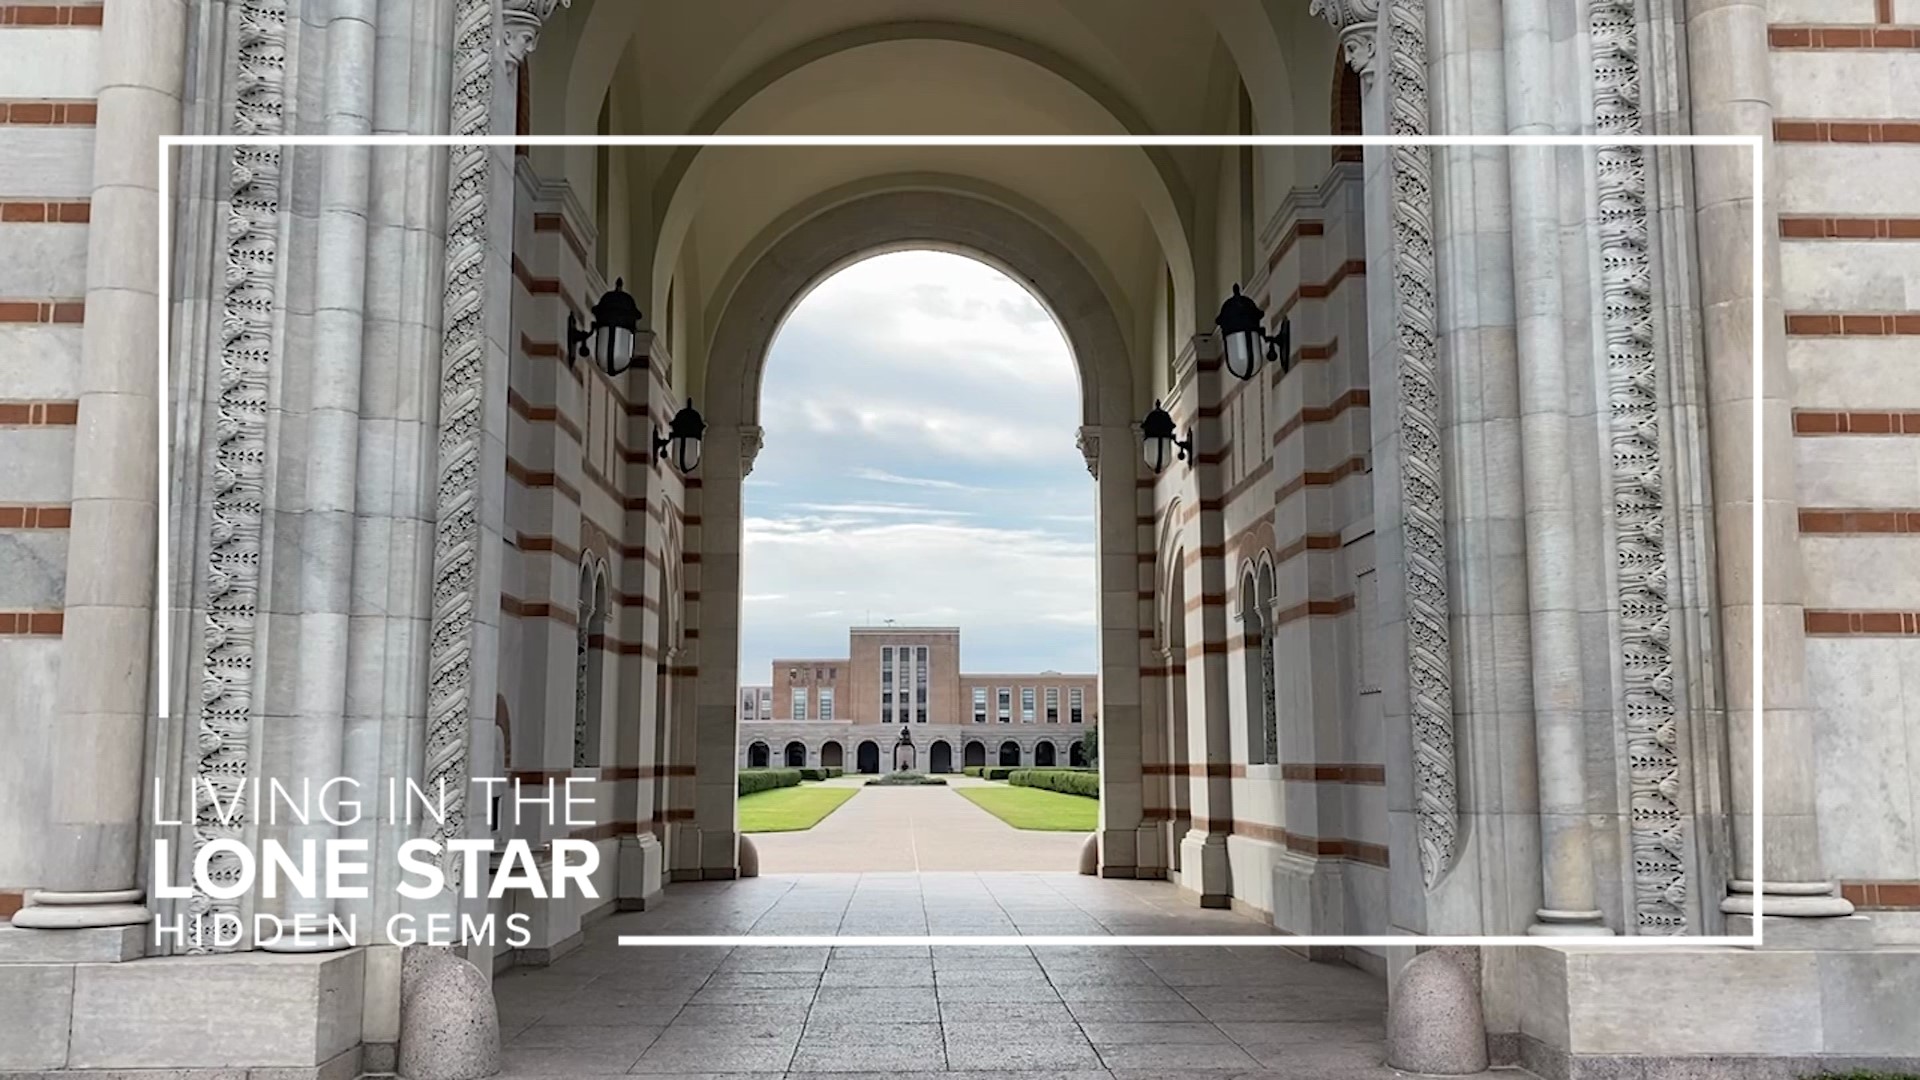 You can do it all at Rice University if you keep an eye out for the Houston campus's hidden details.